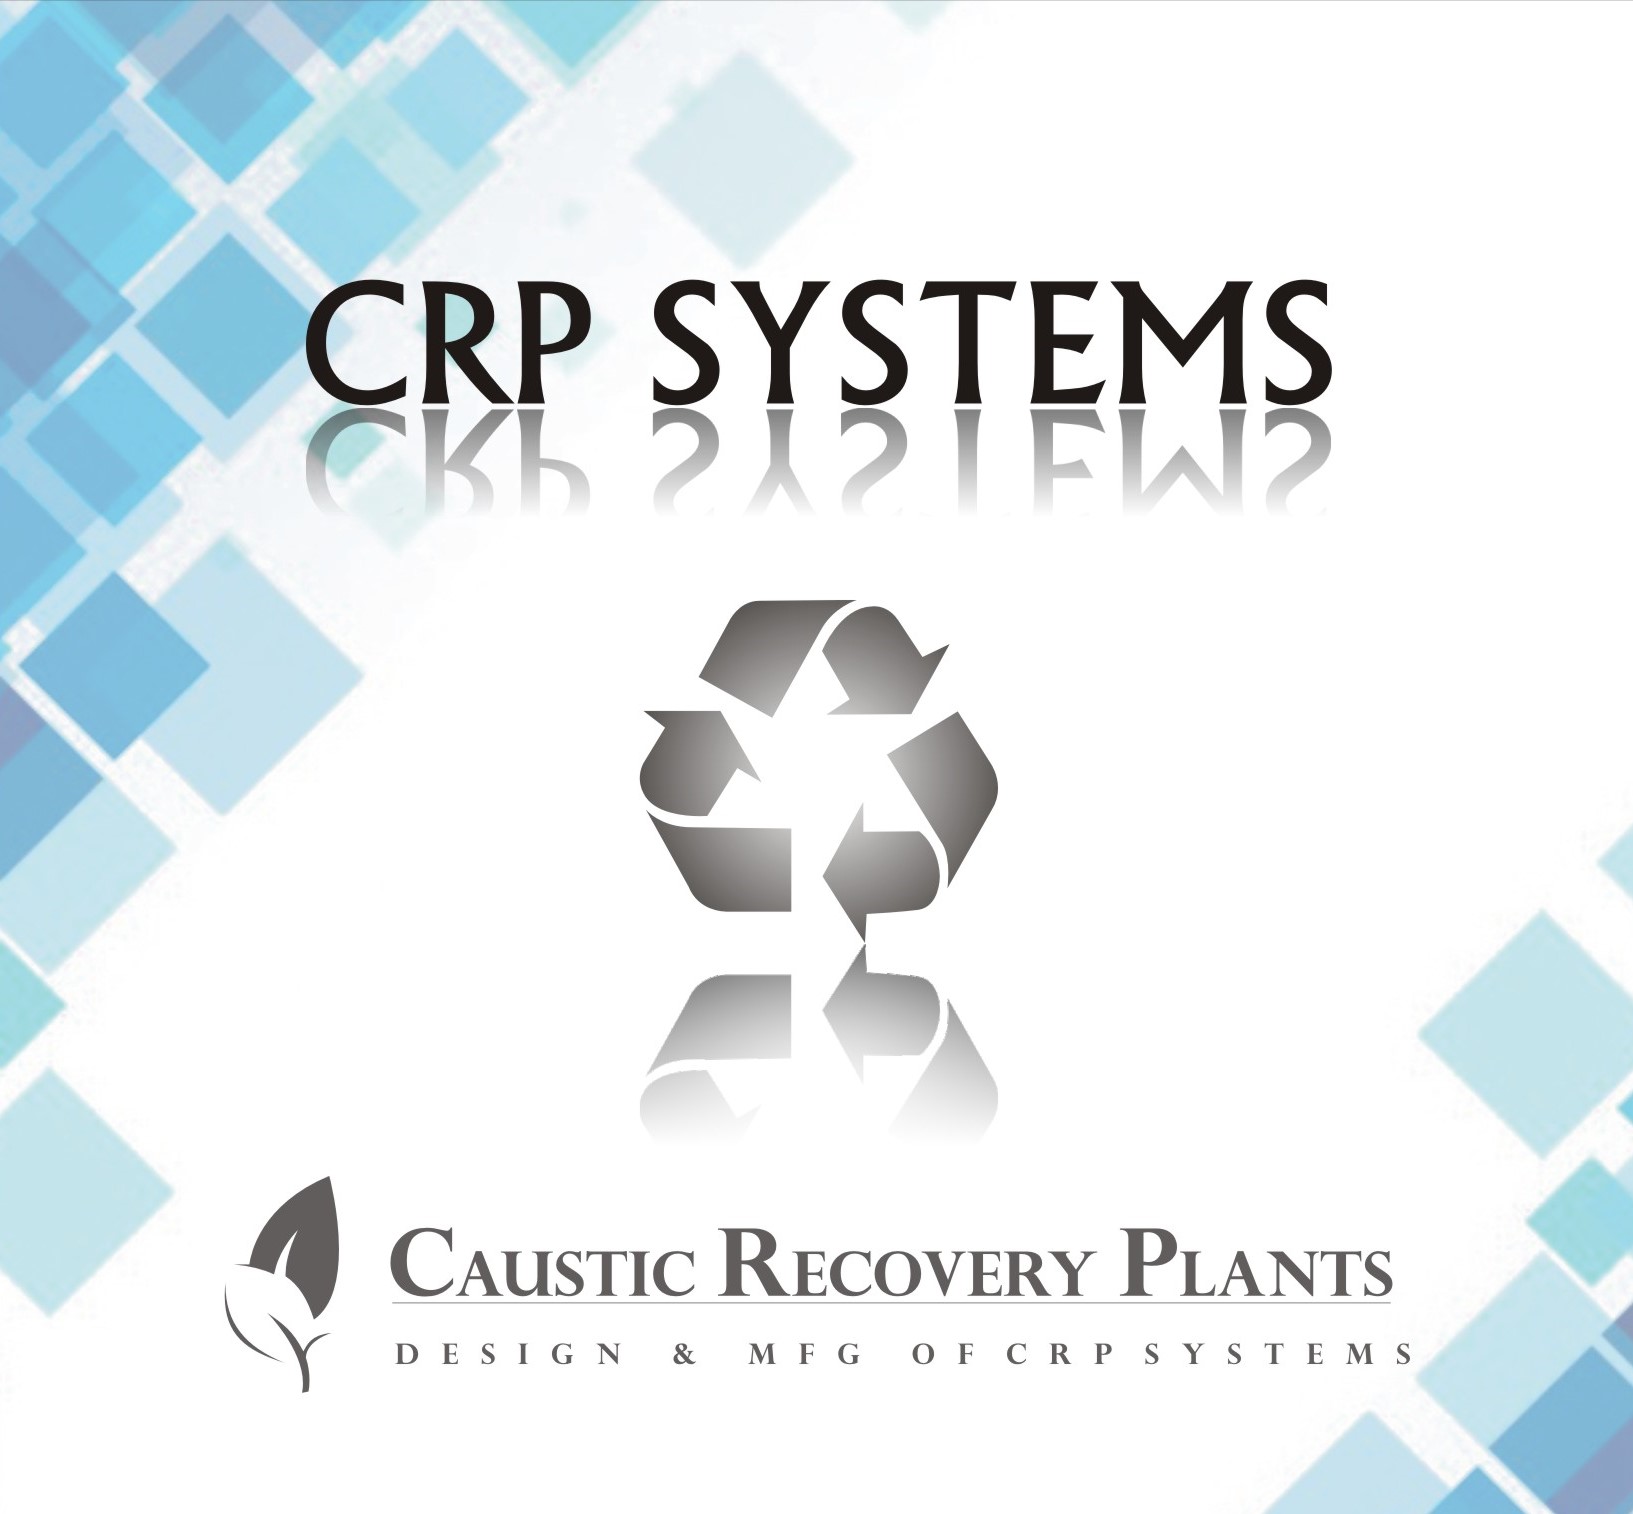 CRP Systems